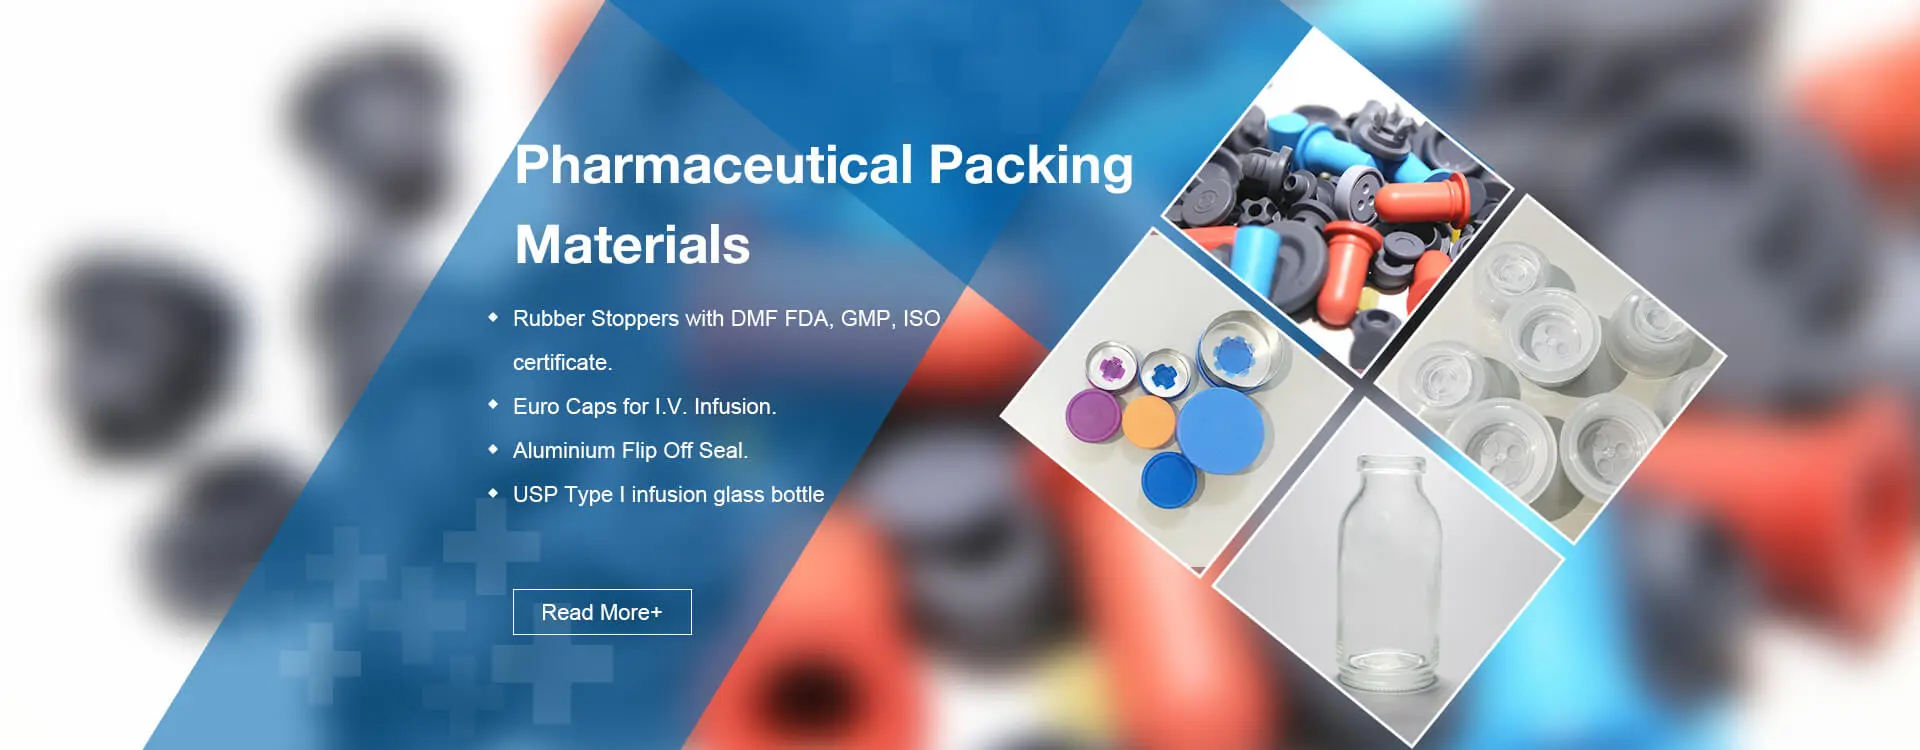 Pharmaceutical Packing Material